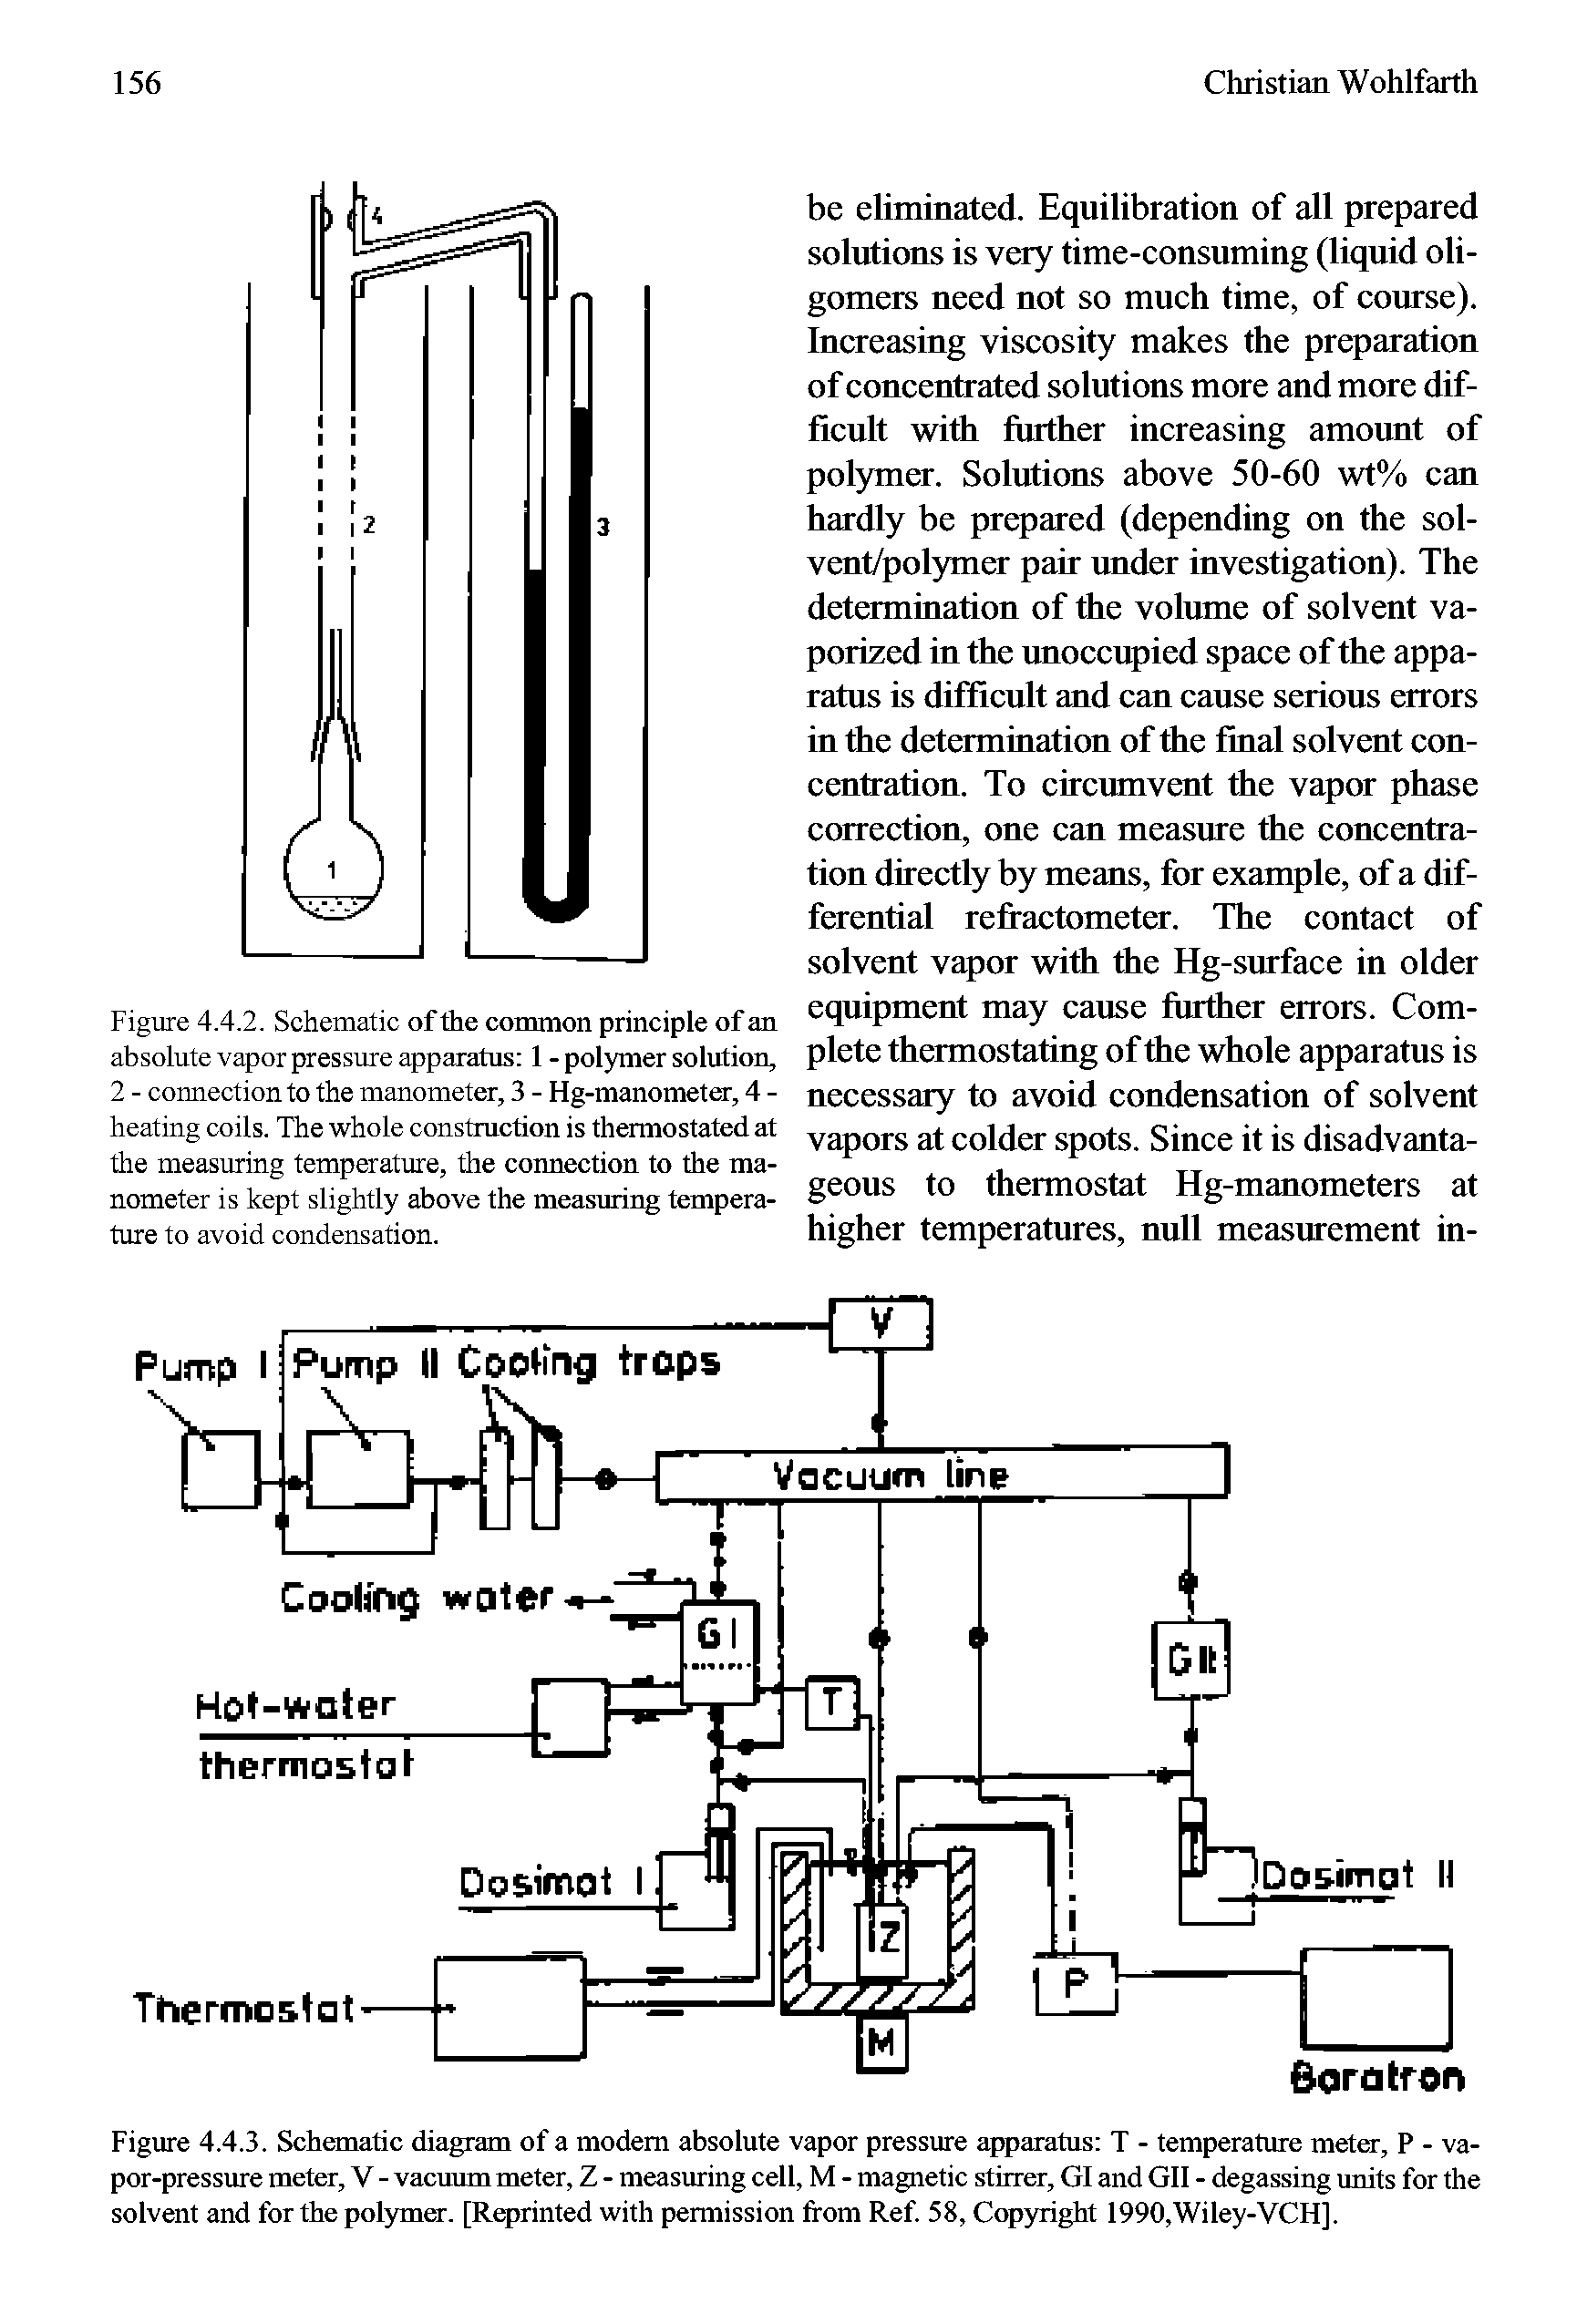 Figure 4.4.3. Schematic diagram of a modem absolute vapor pressure apparatus T - temperature meter, P - vapor-pressure meter, V - vacuum meter, Z - measuring cell, M - magnetic stirrer, GI and Gil - degassing units for the solvent and for the polymer. ptq)rinted with permission from Ref 58, Copyright 1990,Wiley-VCH].